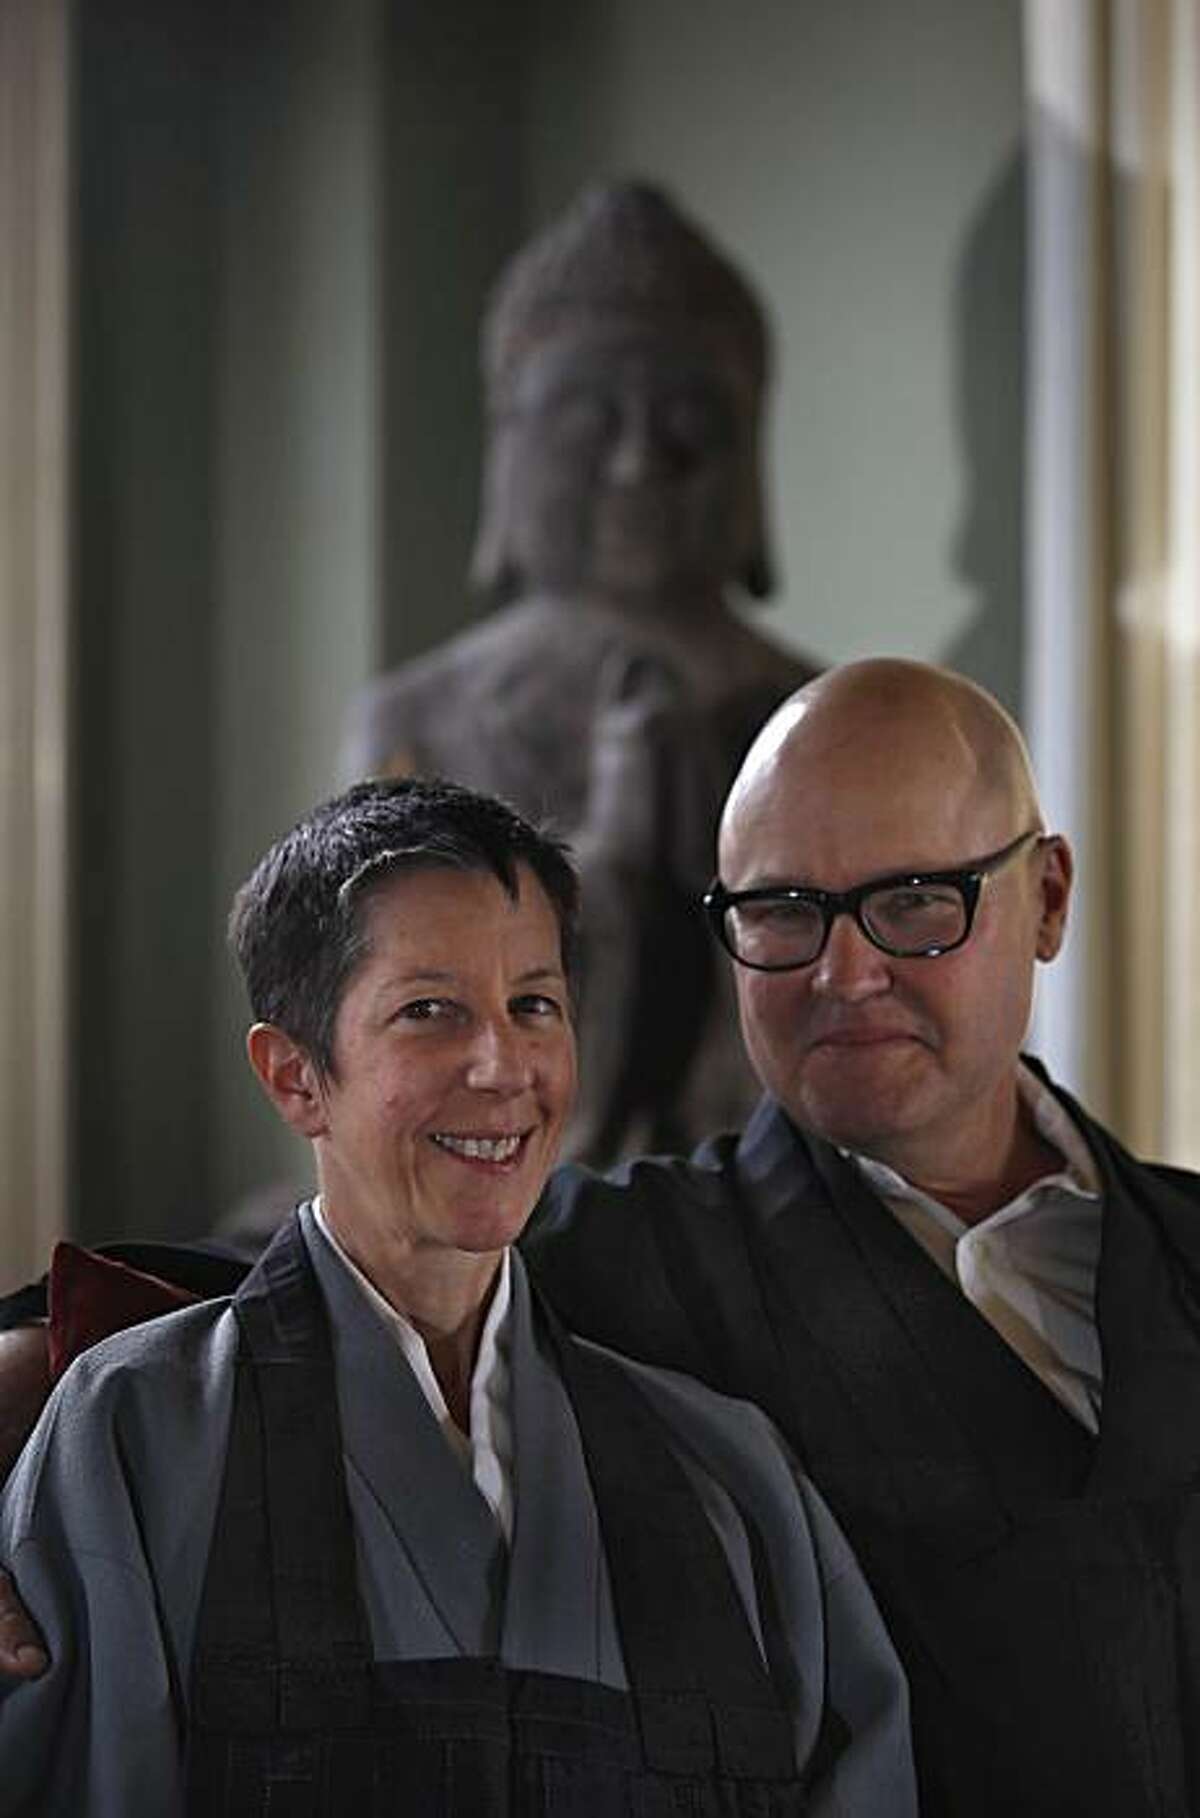 Linda Galijan and Greg Fain sit on the couch at the Zen Center in San Francisco, Calif. on Thursday, March 25, 2010.